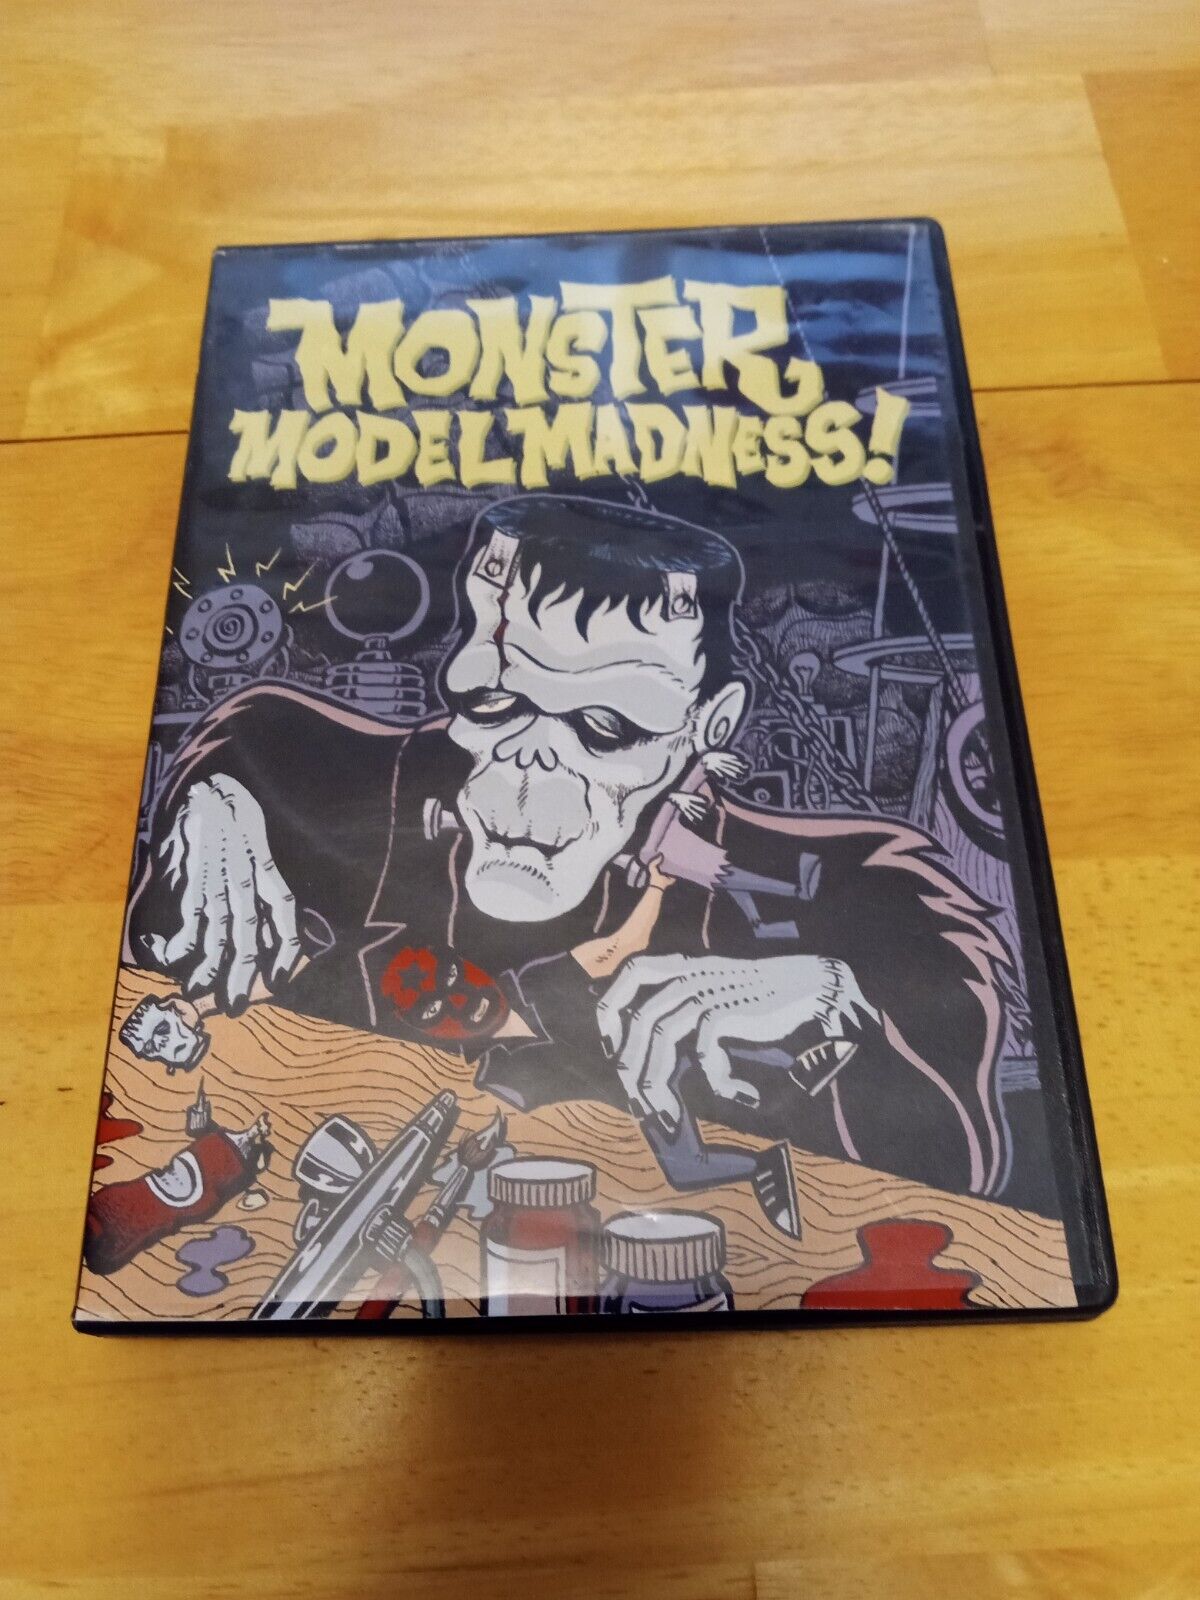 Monster Model Madness DVD A Crowdiddley Production Rare Wonderfest Release 